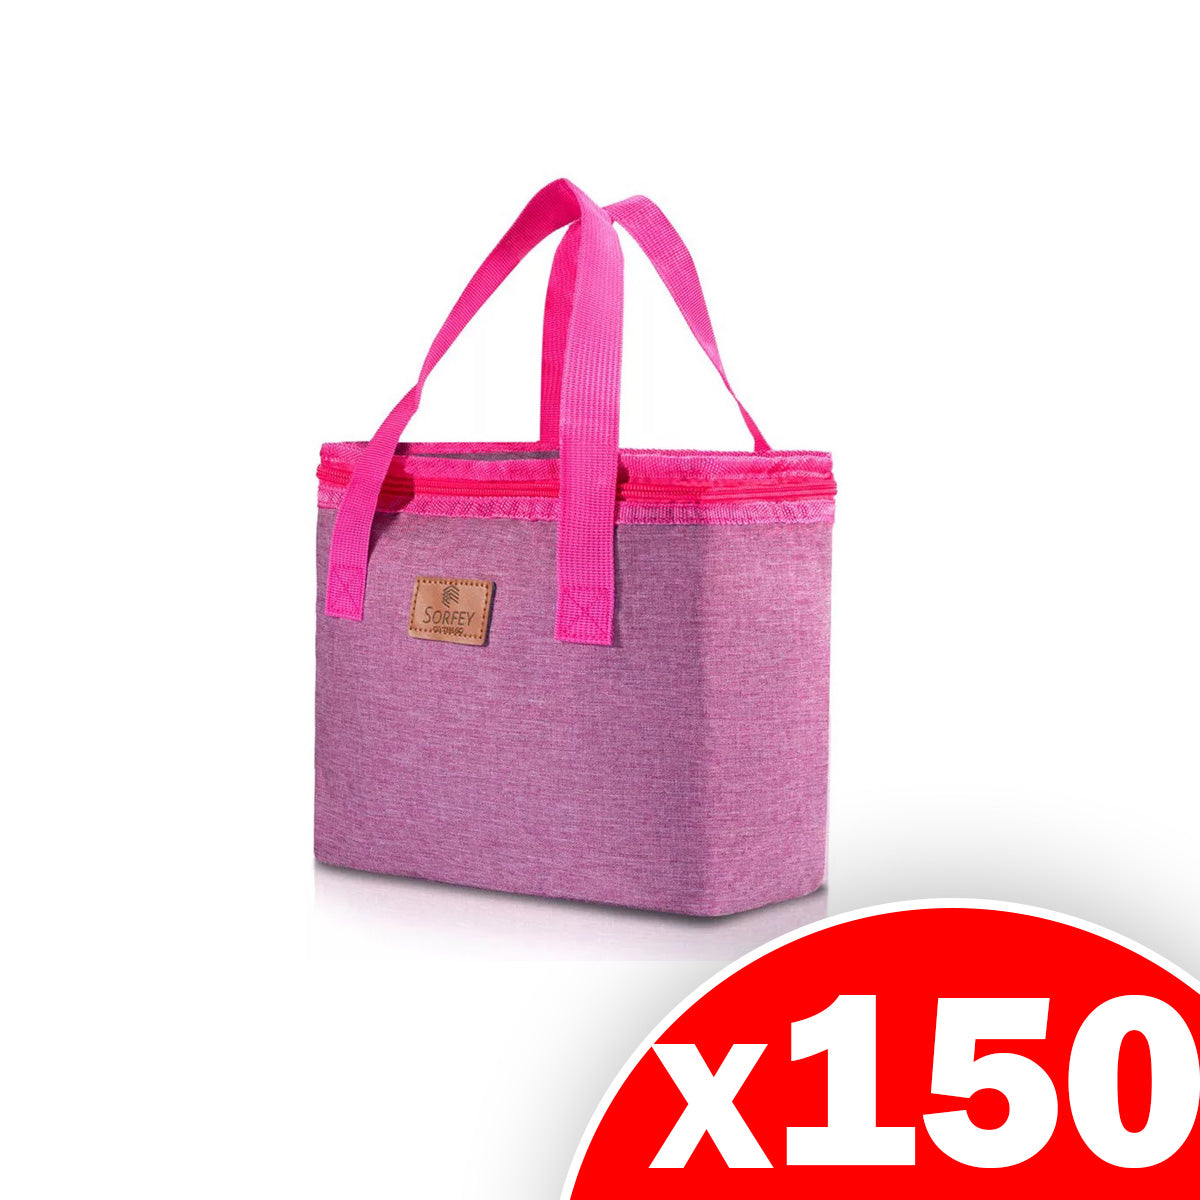 Lunch Bag, Insulated Cooler Lunch Bag, Hot Pink, 150 Pack